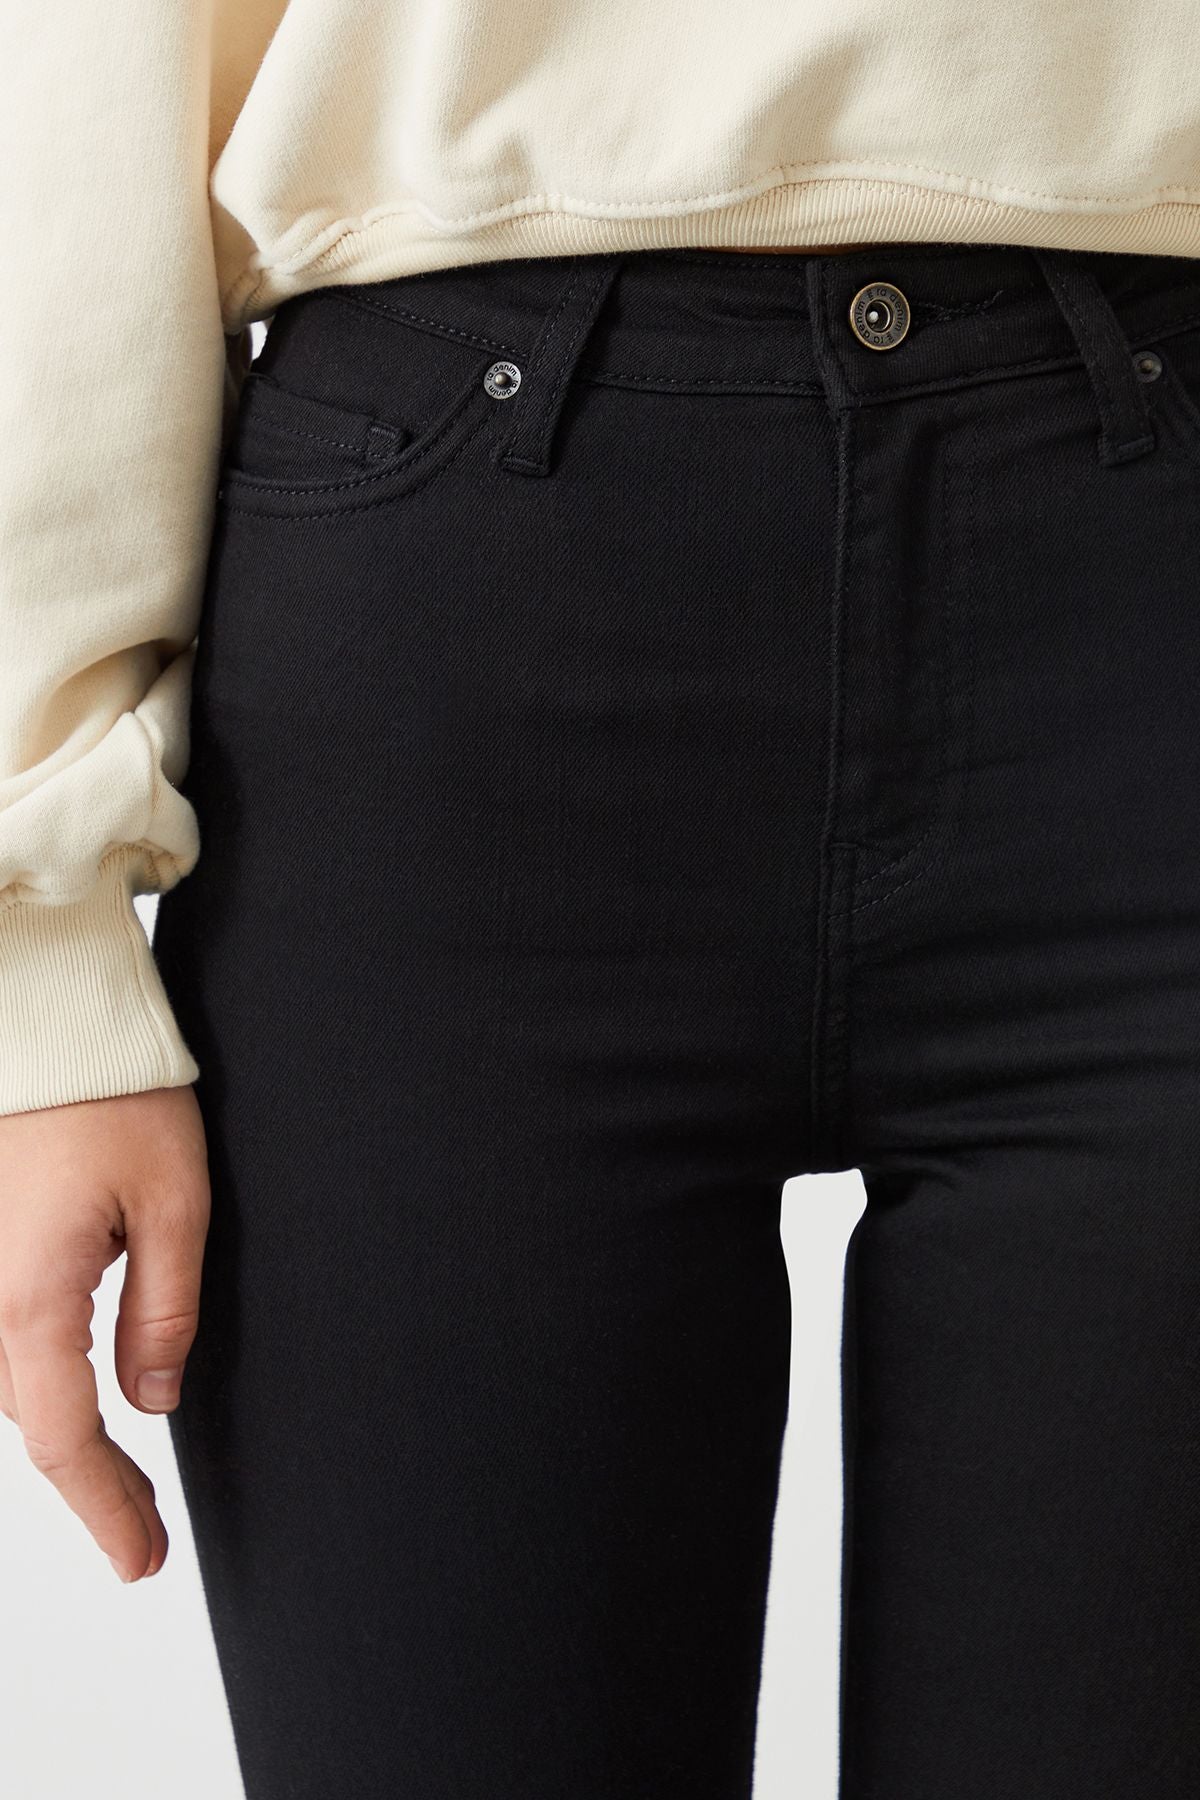 a close up of a person wearing black jeans